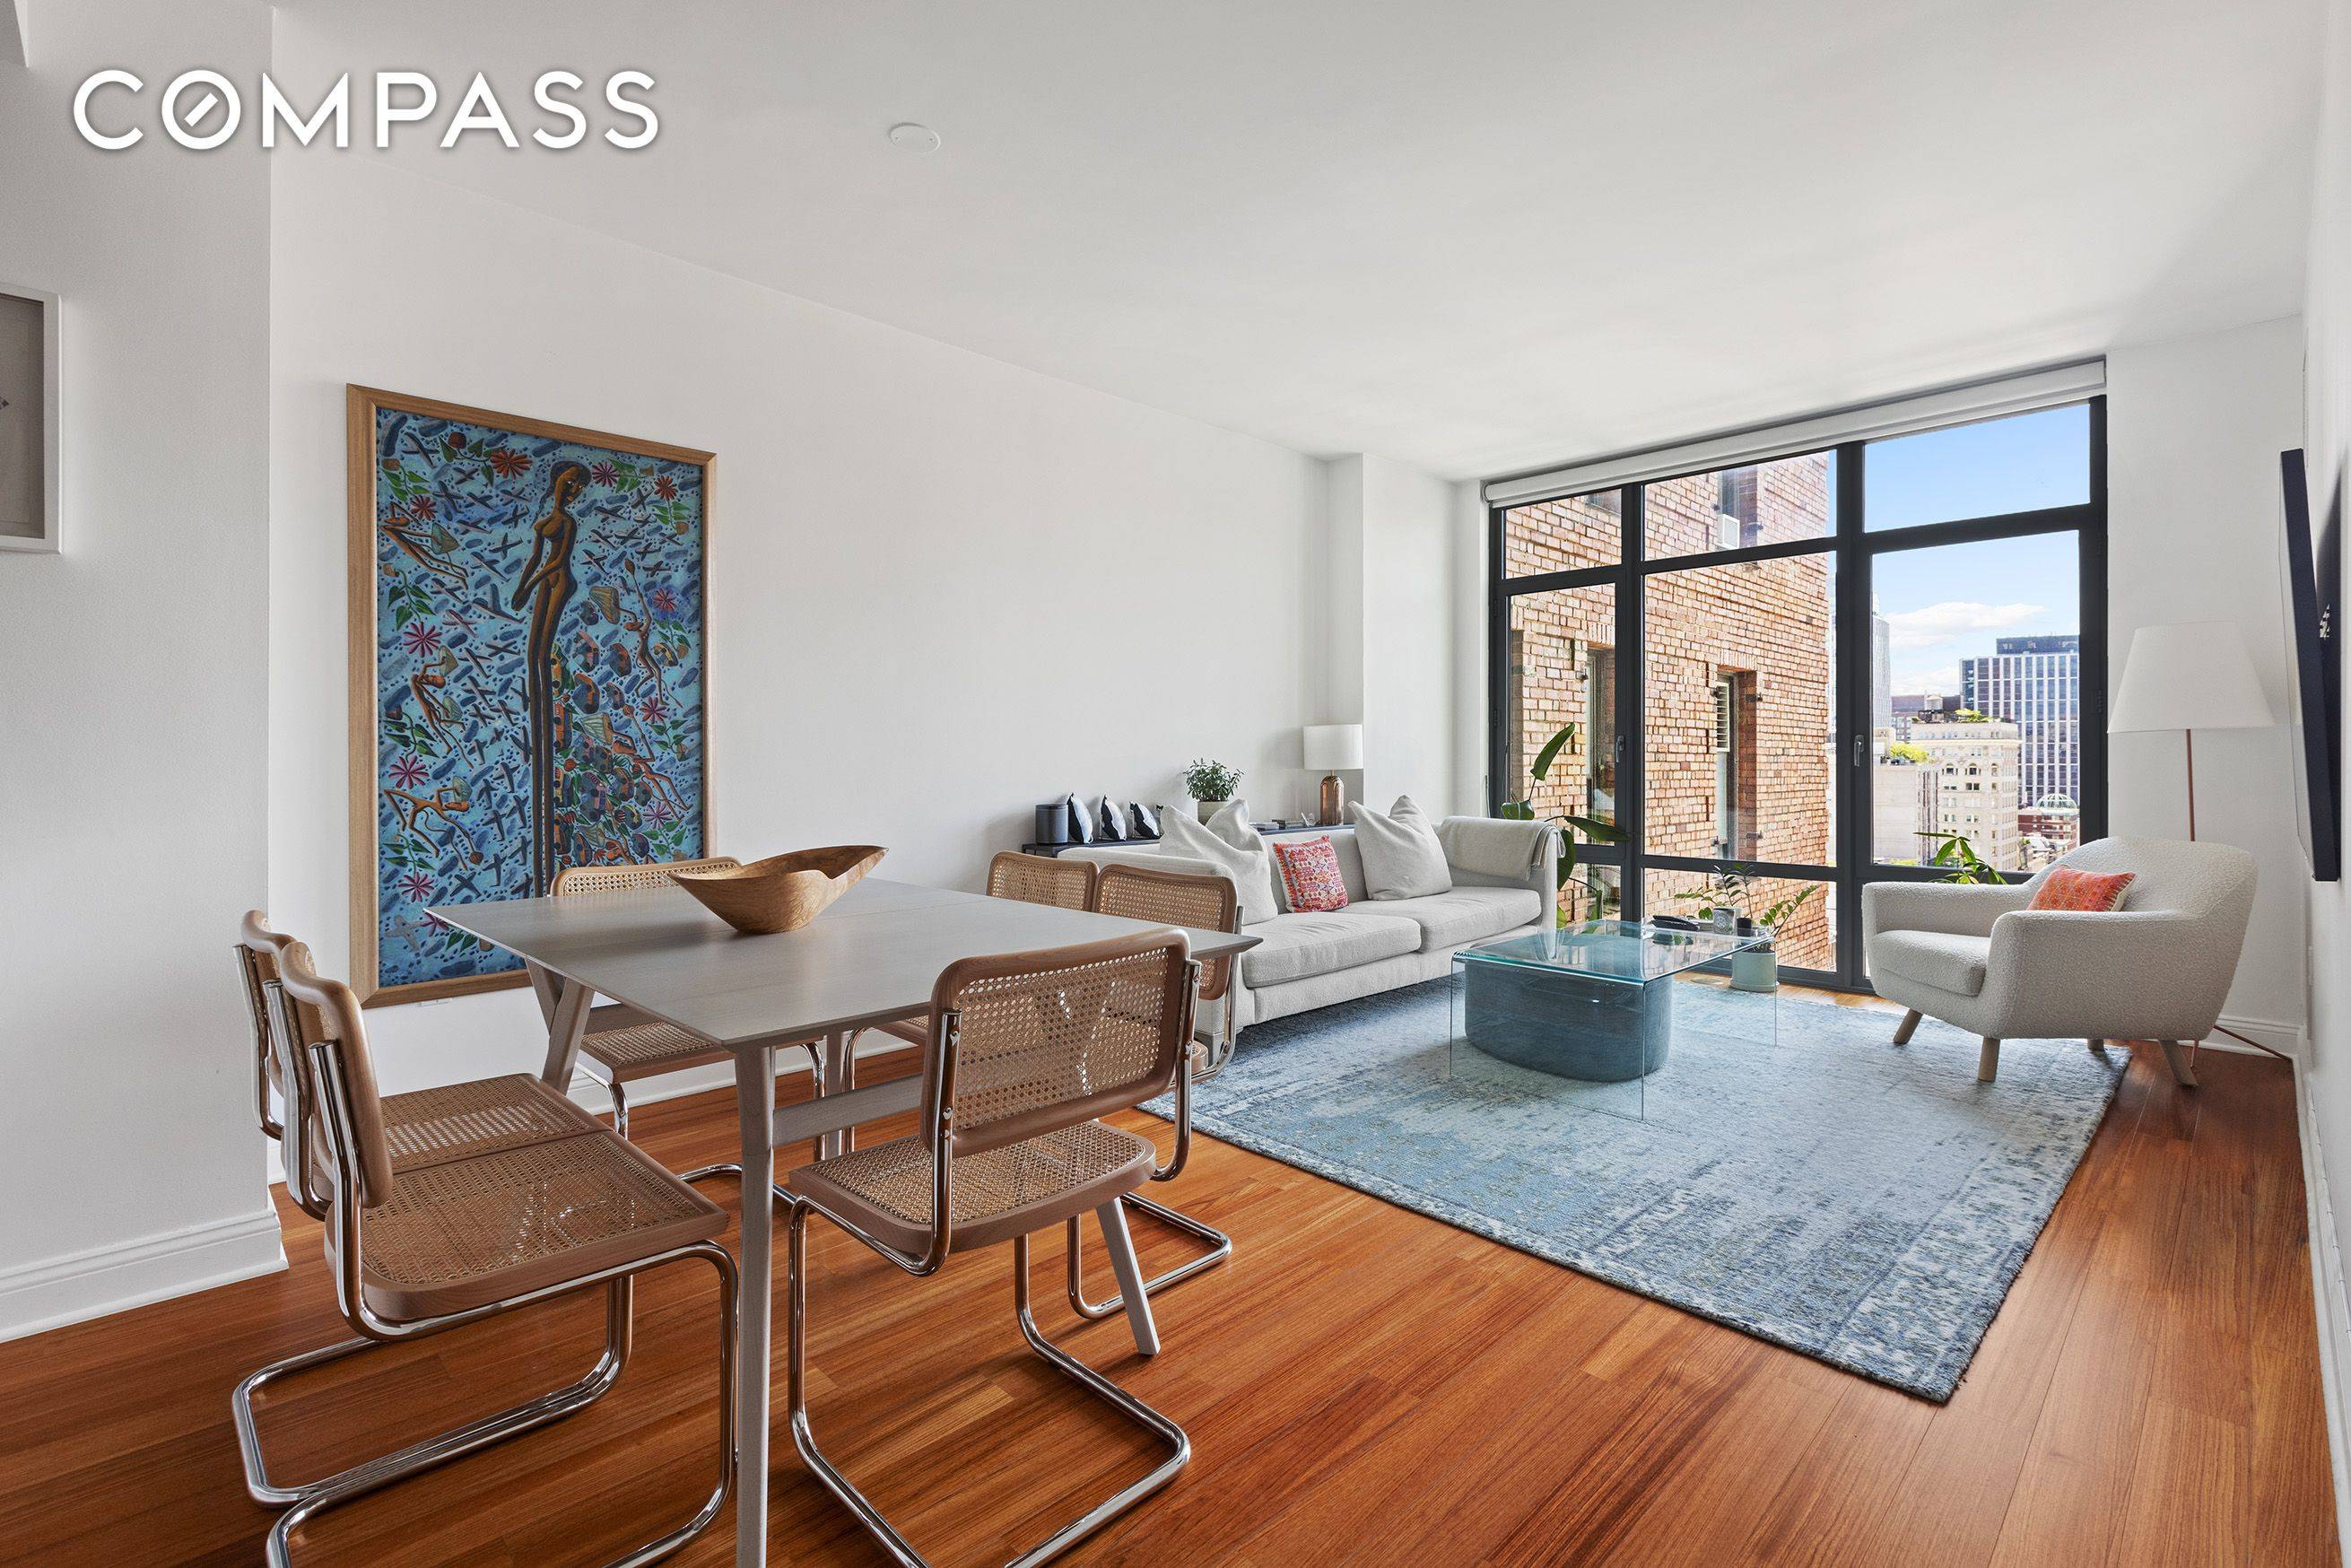 Modern Tribeca two bedroom, two bathroom condo with in unit washer dryer, high ceilings and views.